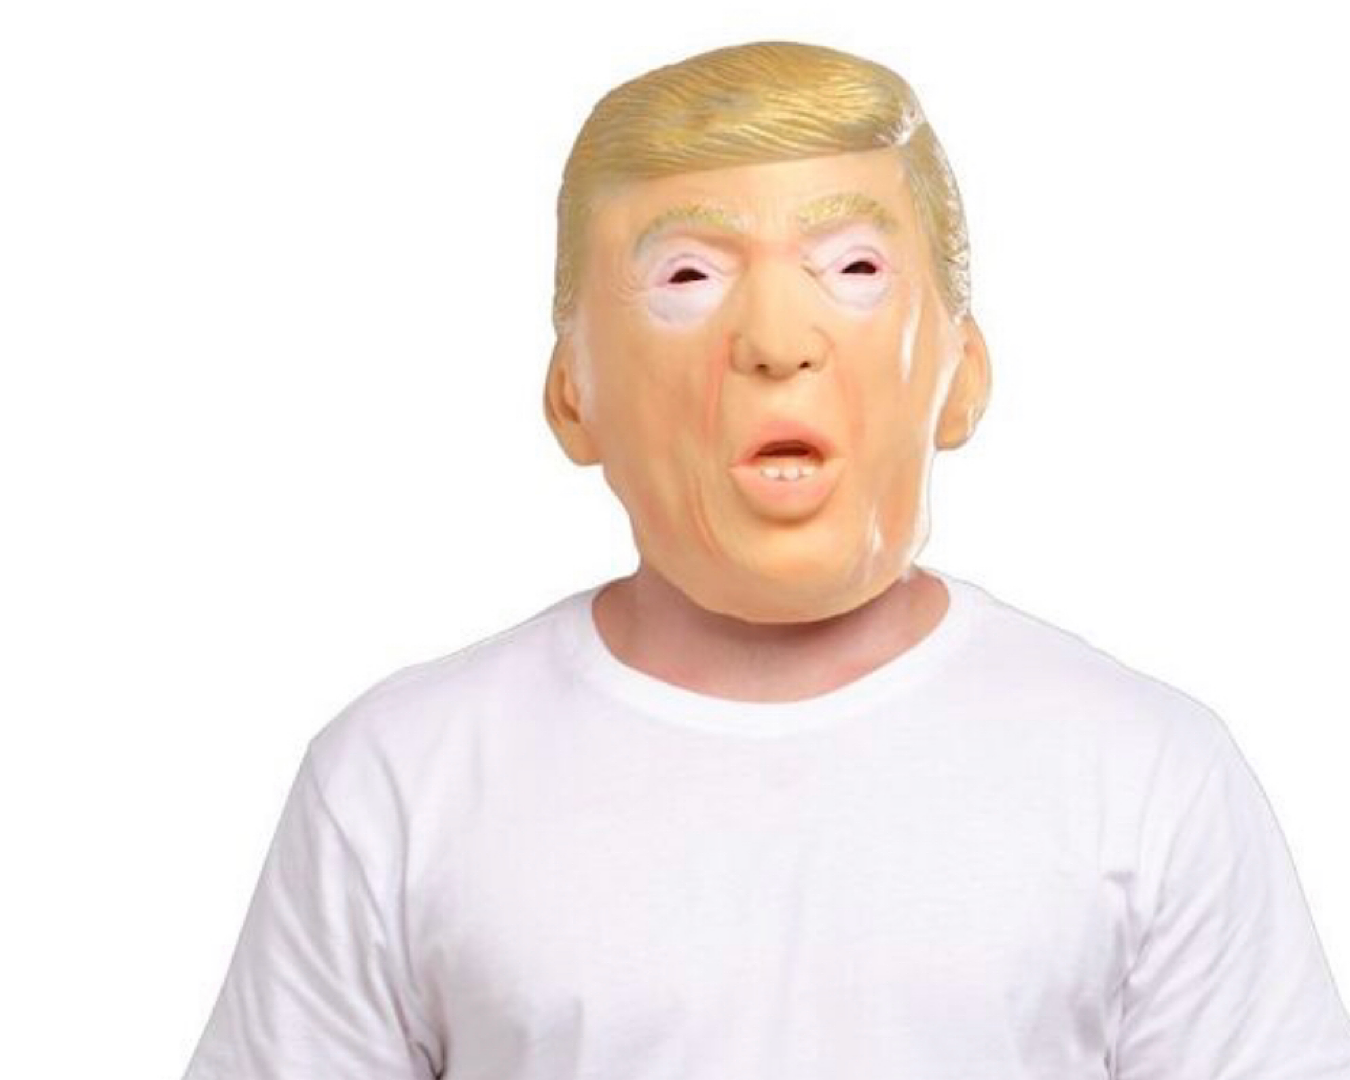 A person wearing a gross, semi-melted looking mask of Donald Trump and a white t-shirt.